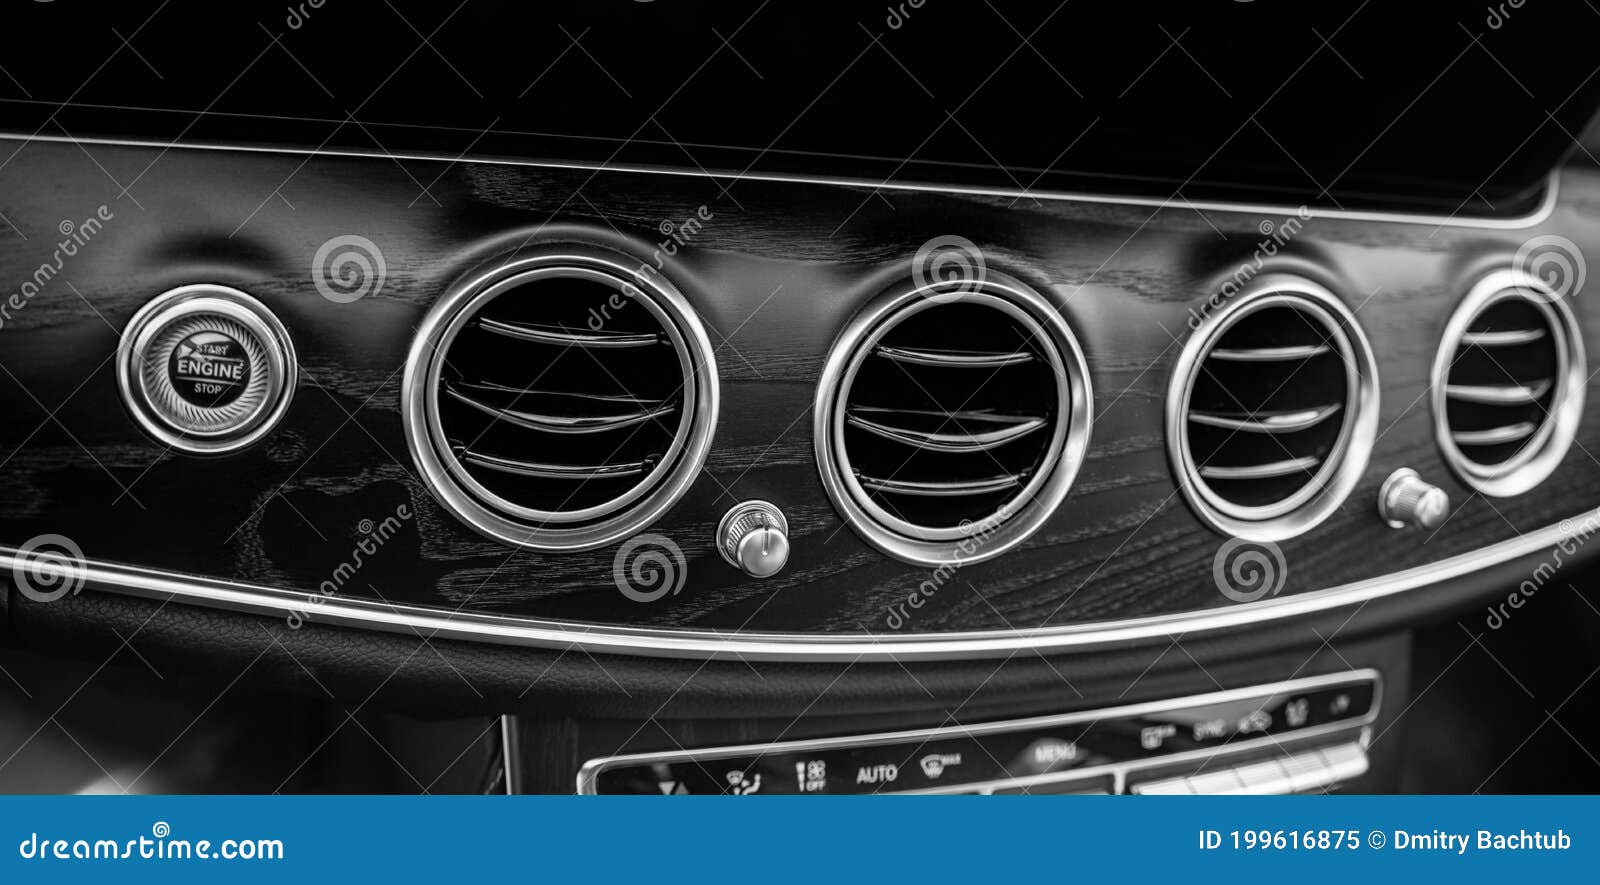 Car Ventilation Grille Air Conditioner Stock Image - Image of luxury,  exchanging: 199616875